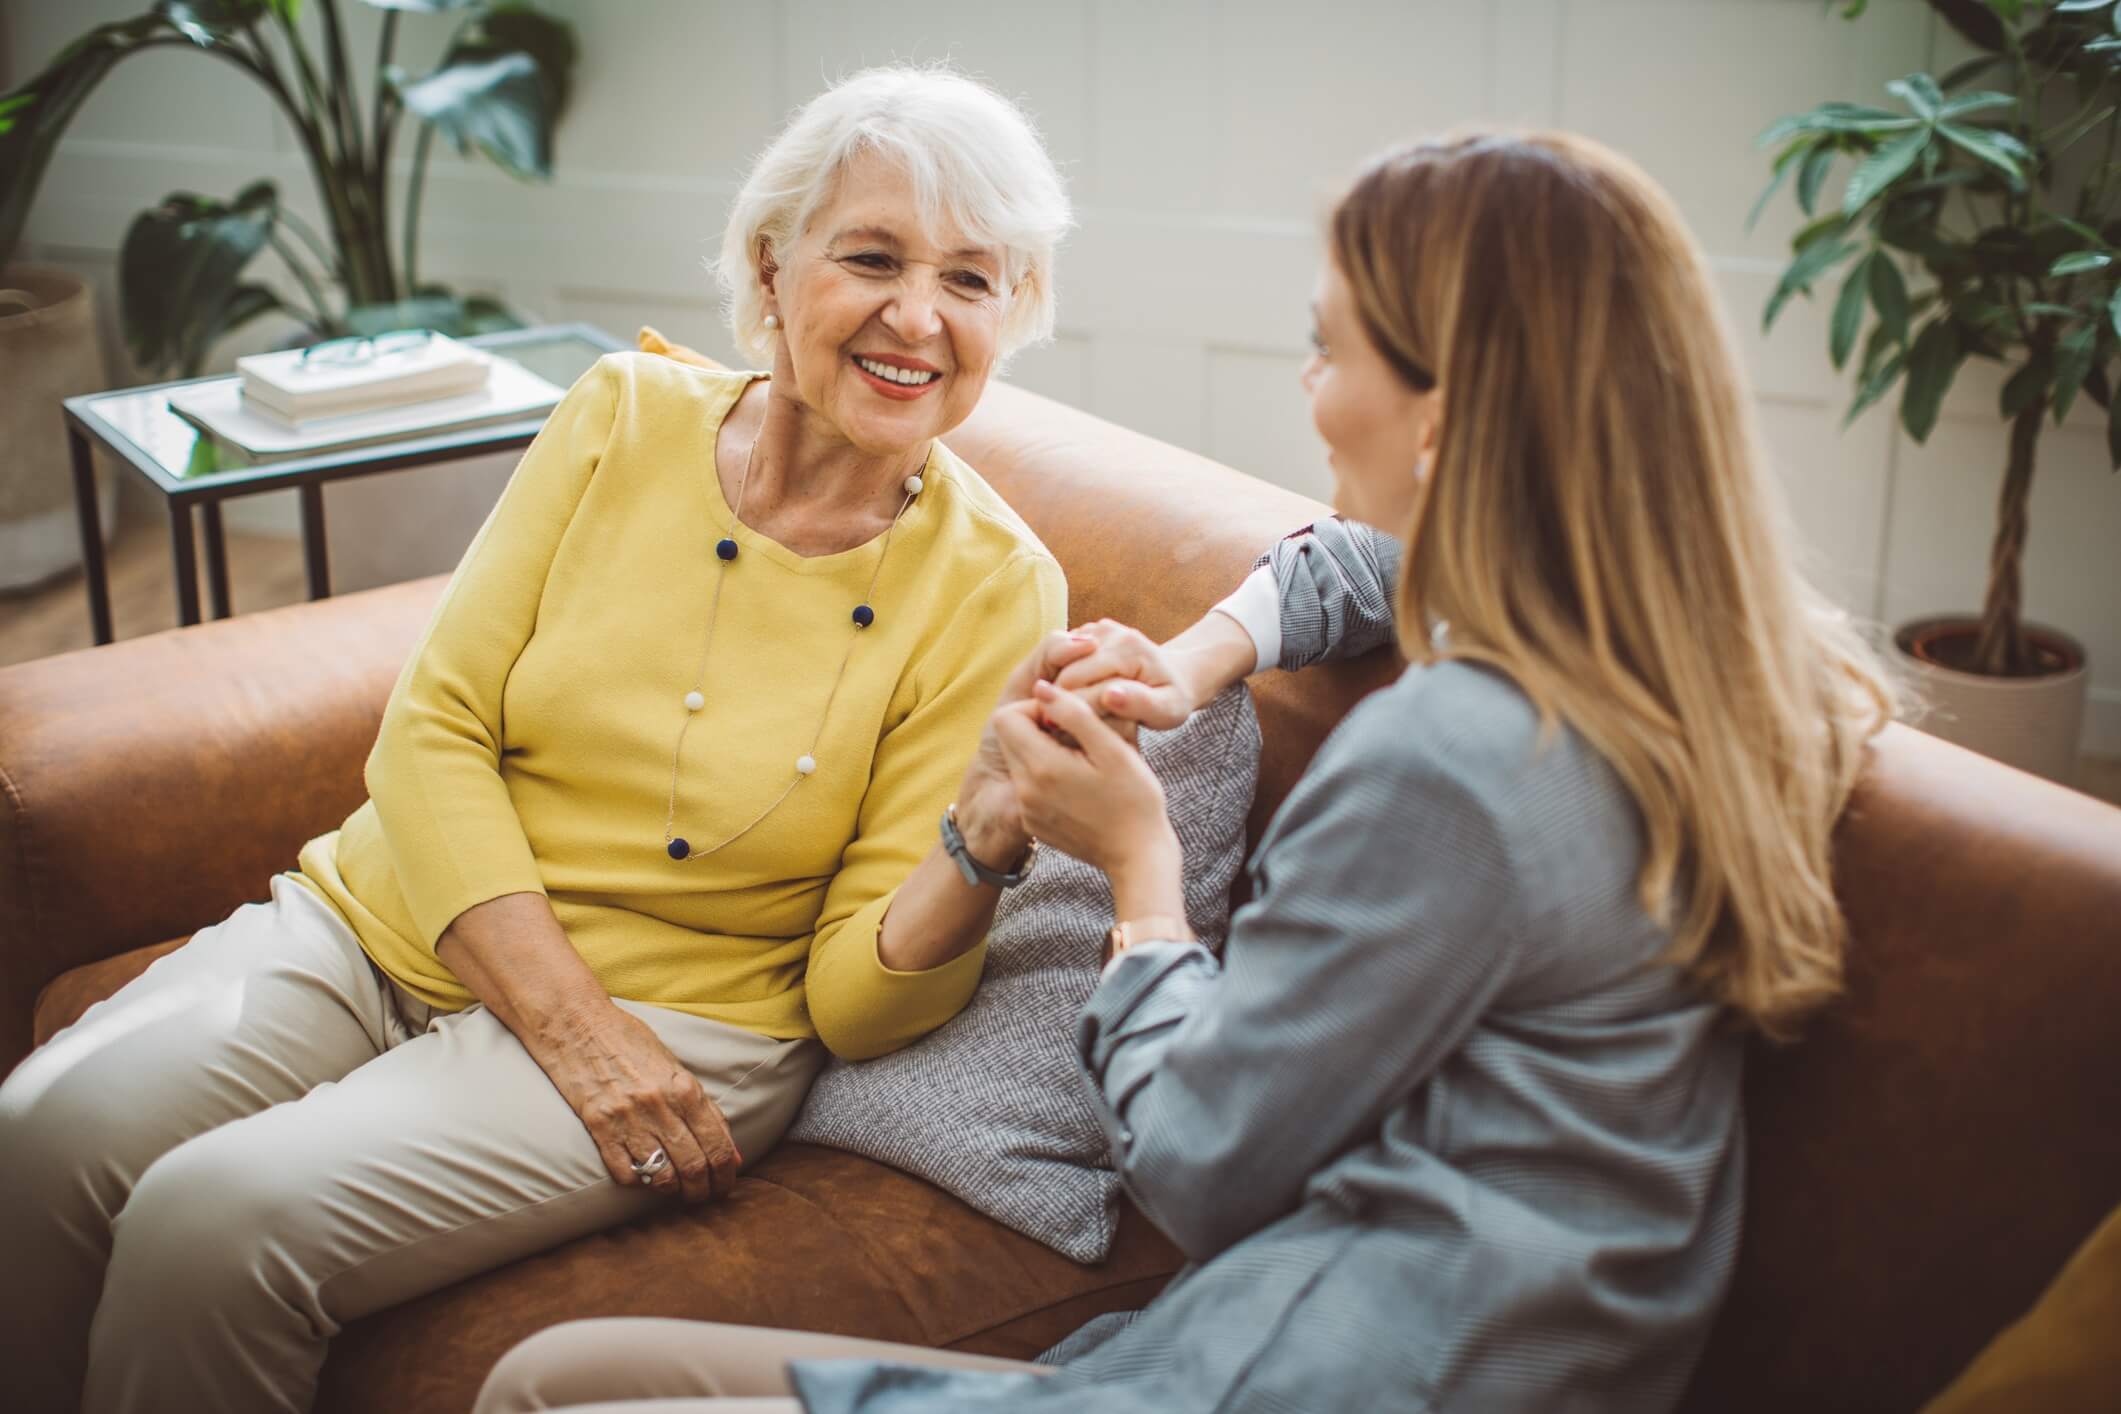 Senior woman sitting on couch with adult daughter holding hands, smiling, & talking